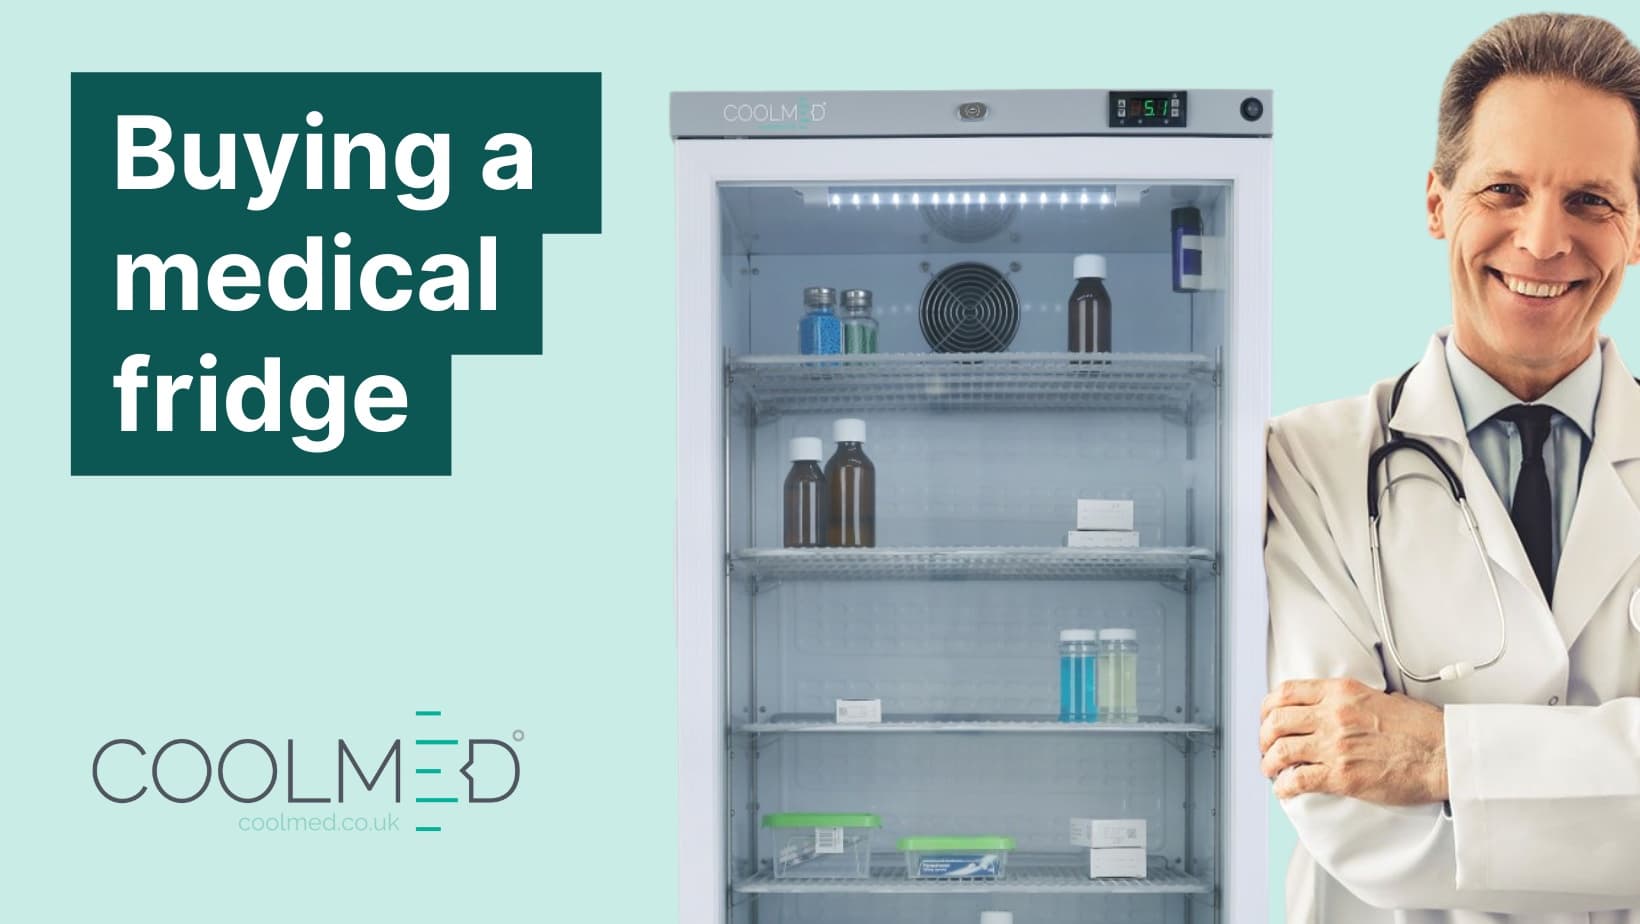 5 factors to consider when buying a medical fridge graphic by CoolMed. The graphic shows a male doctor leaning against a medical fridge.